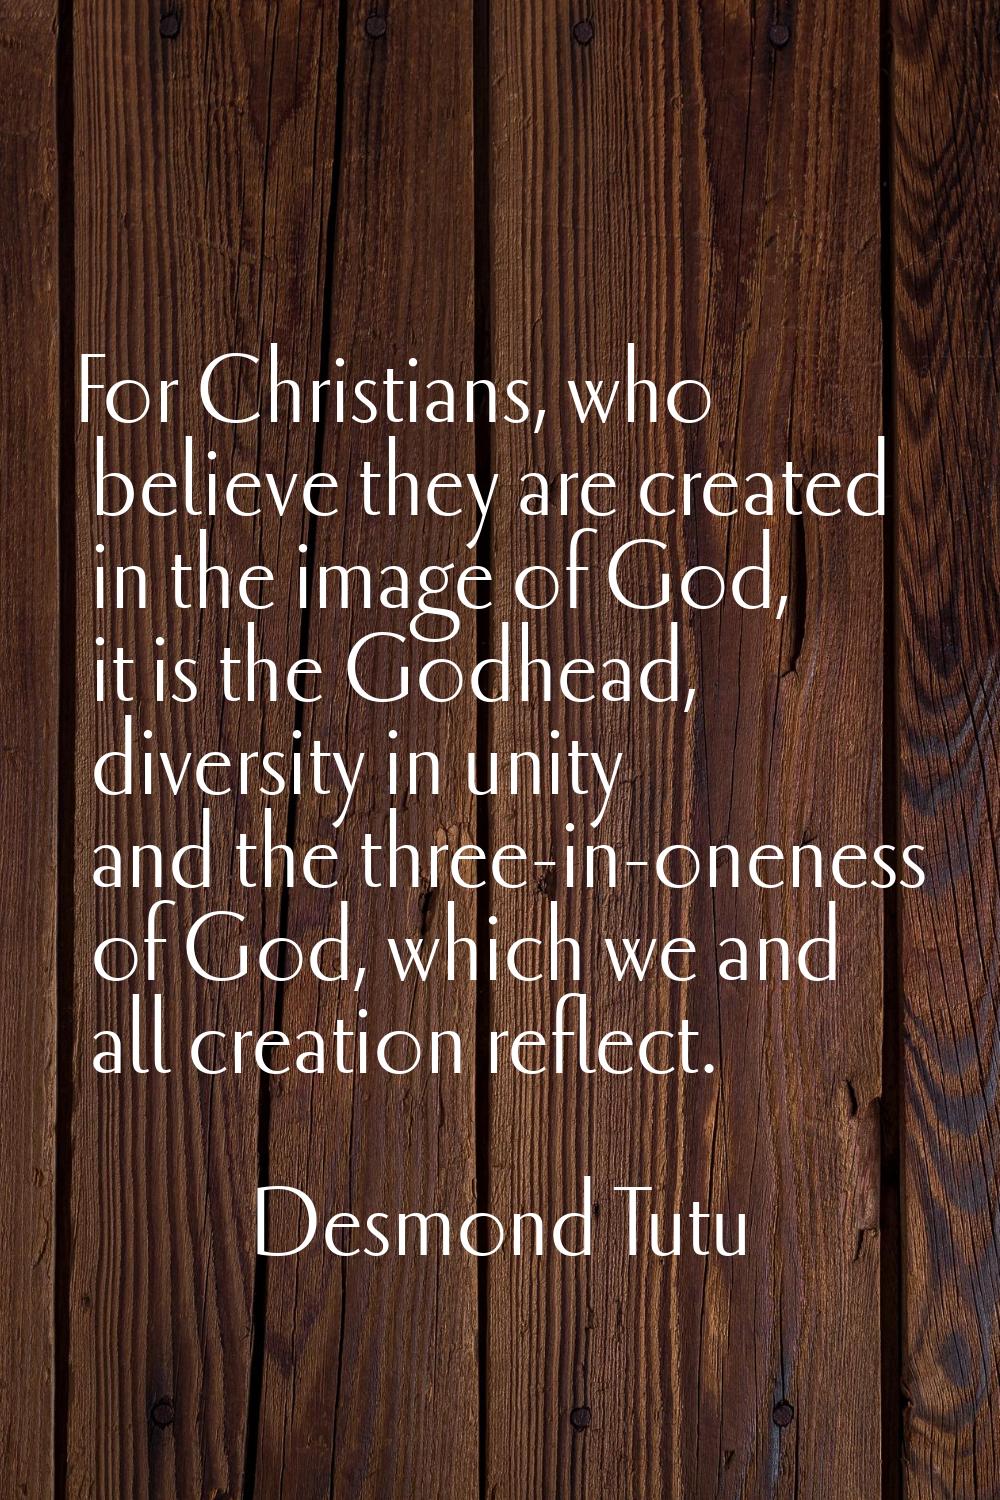 For Christians, who believe they are created in the image of God, it is the Godhead, diversity in u